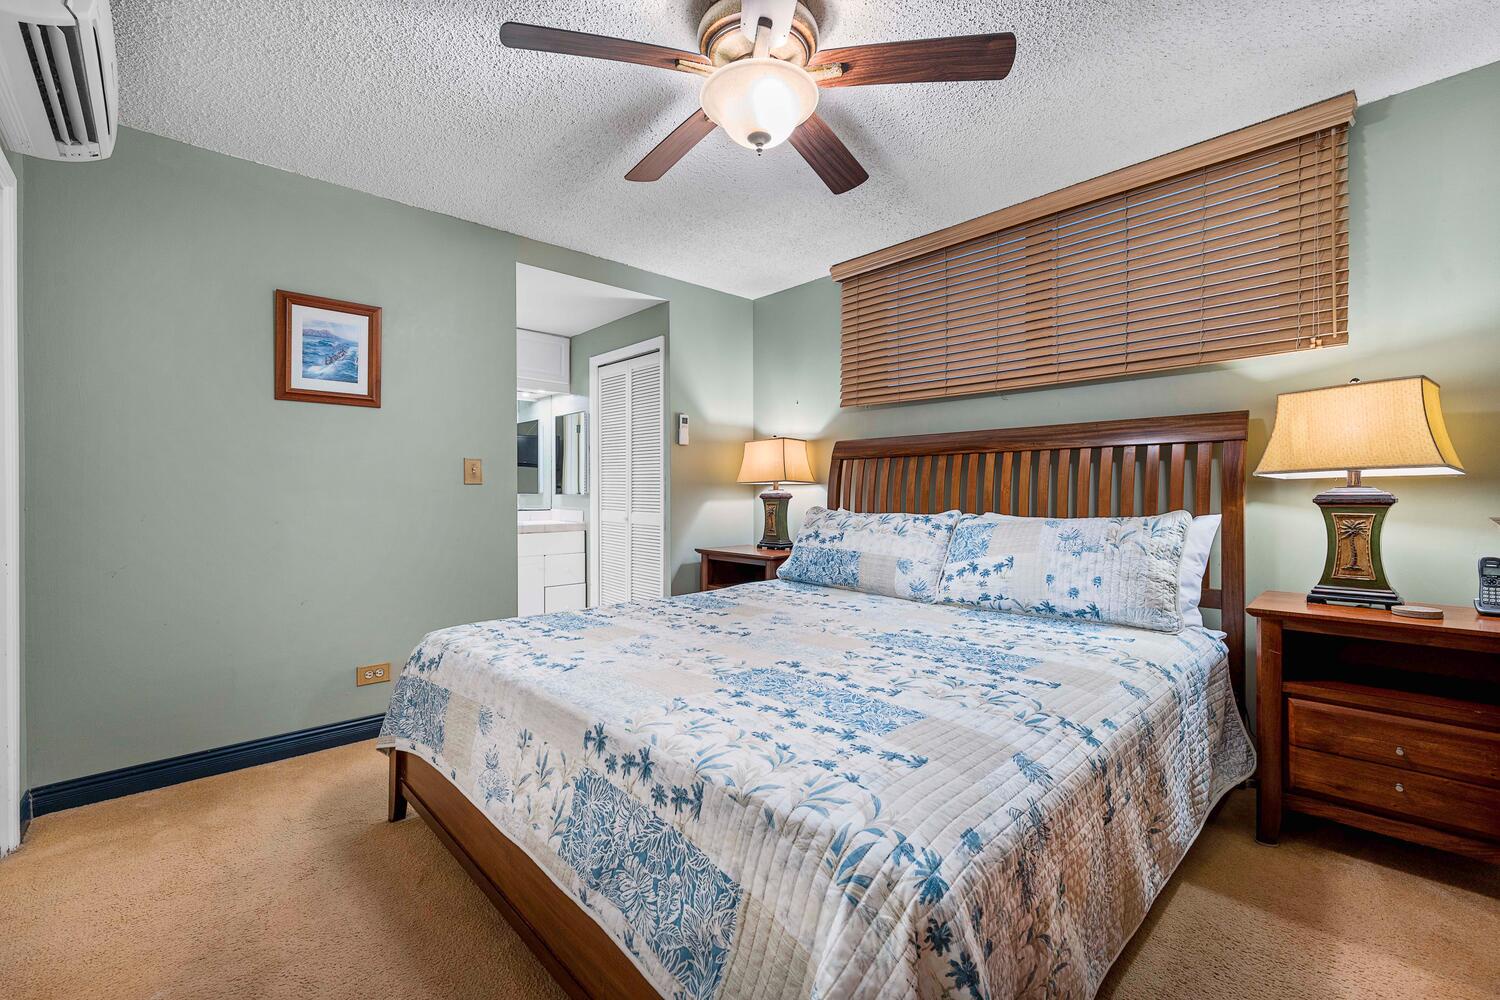 Kailua Kona Vacation Rentals, Kona Alii 302 - The primary bedroom with a plush king bed.